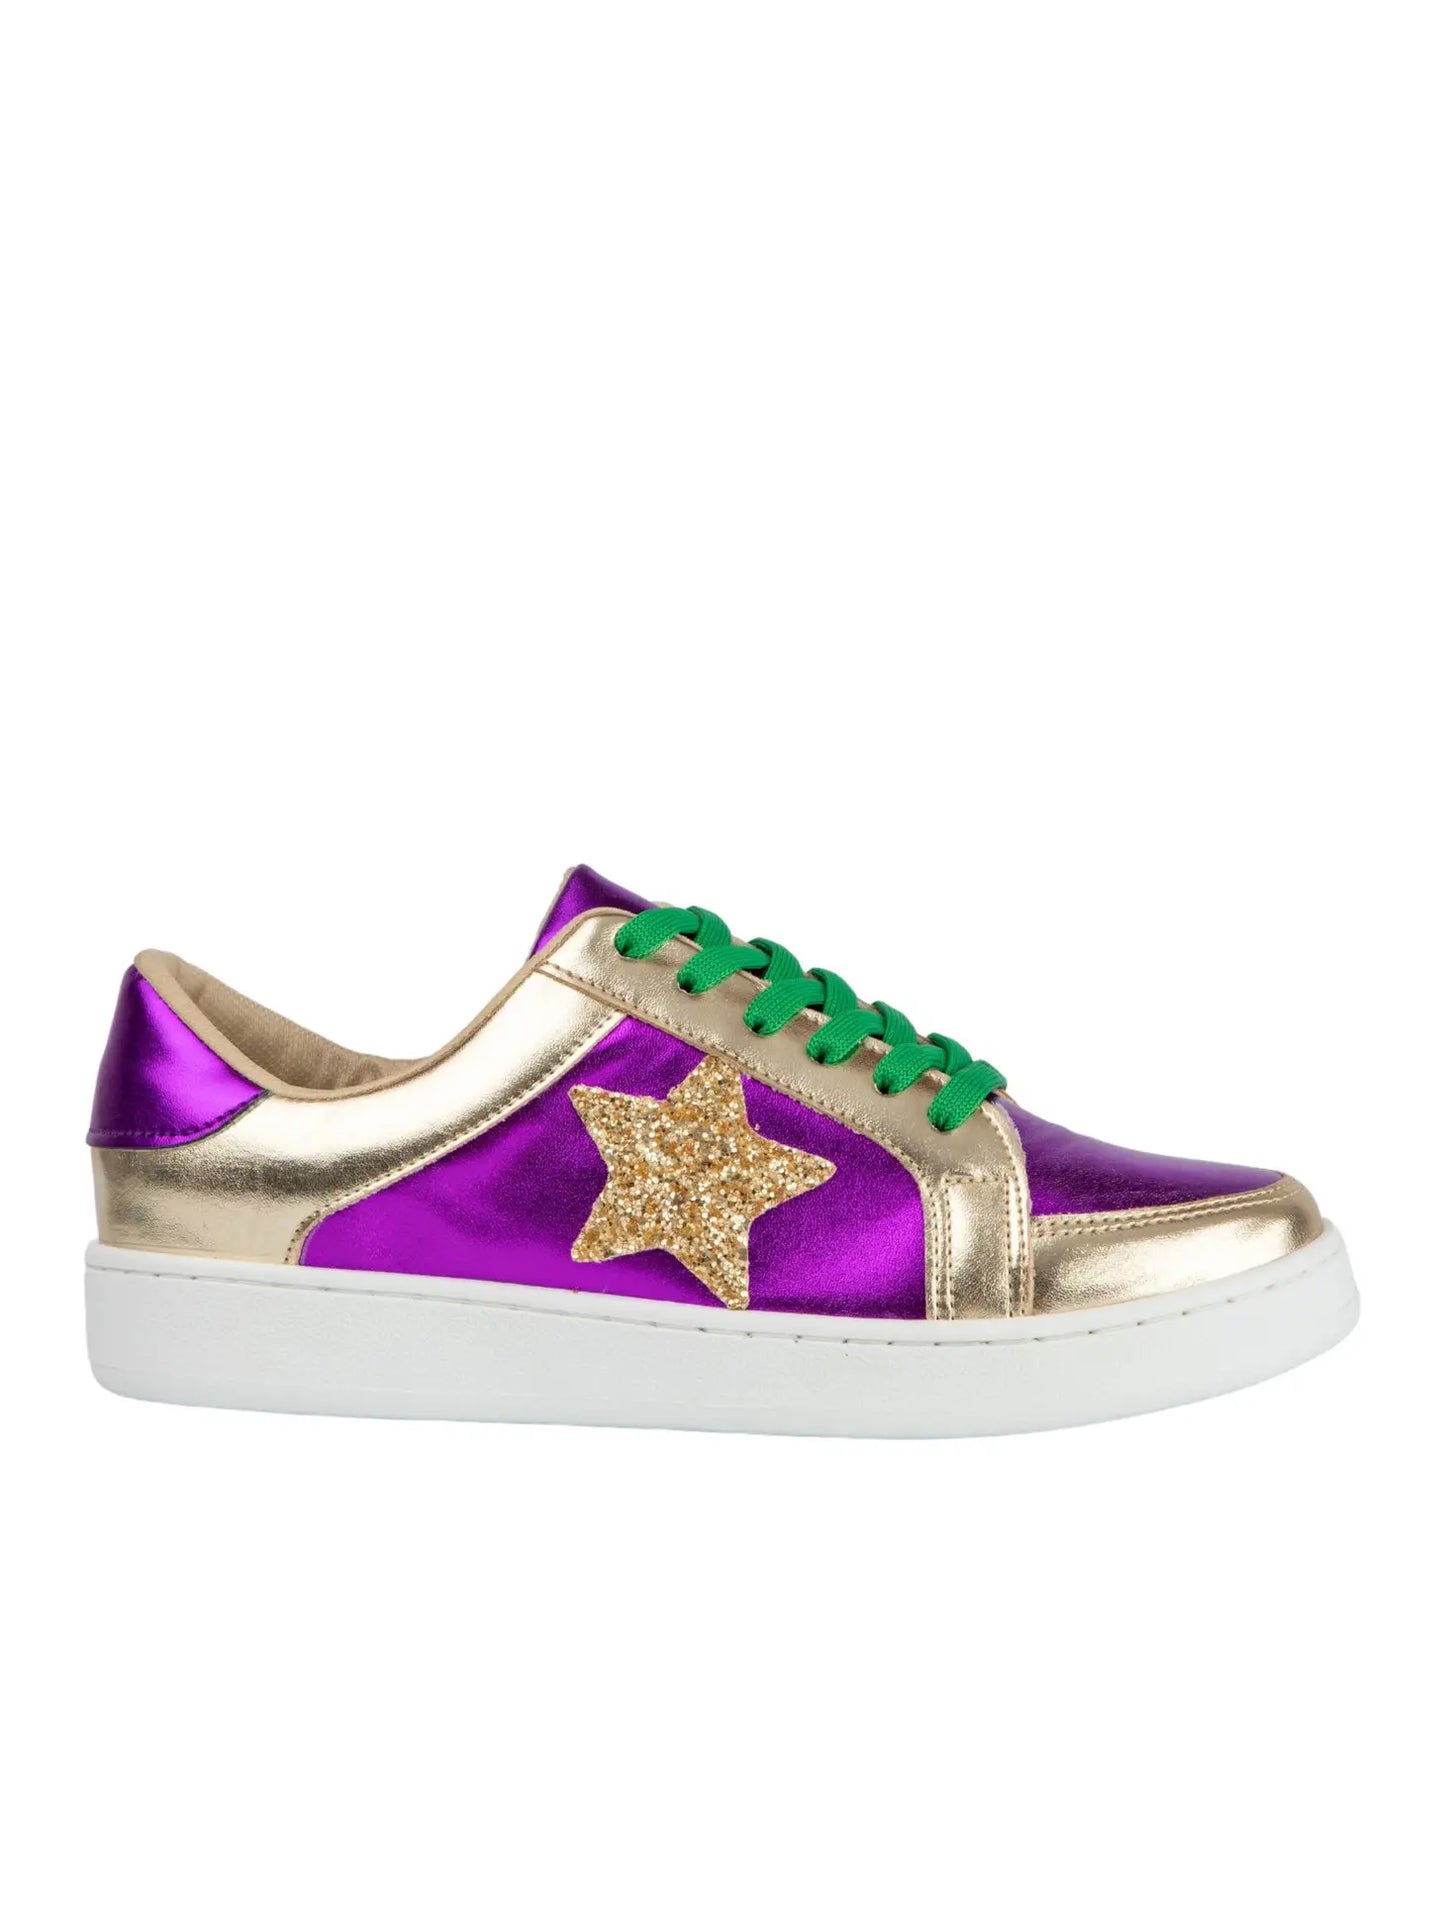 Second Line Sneakers